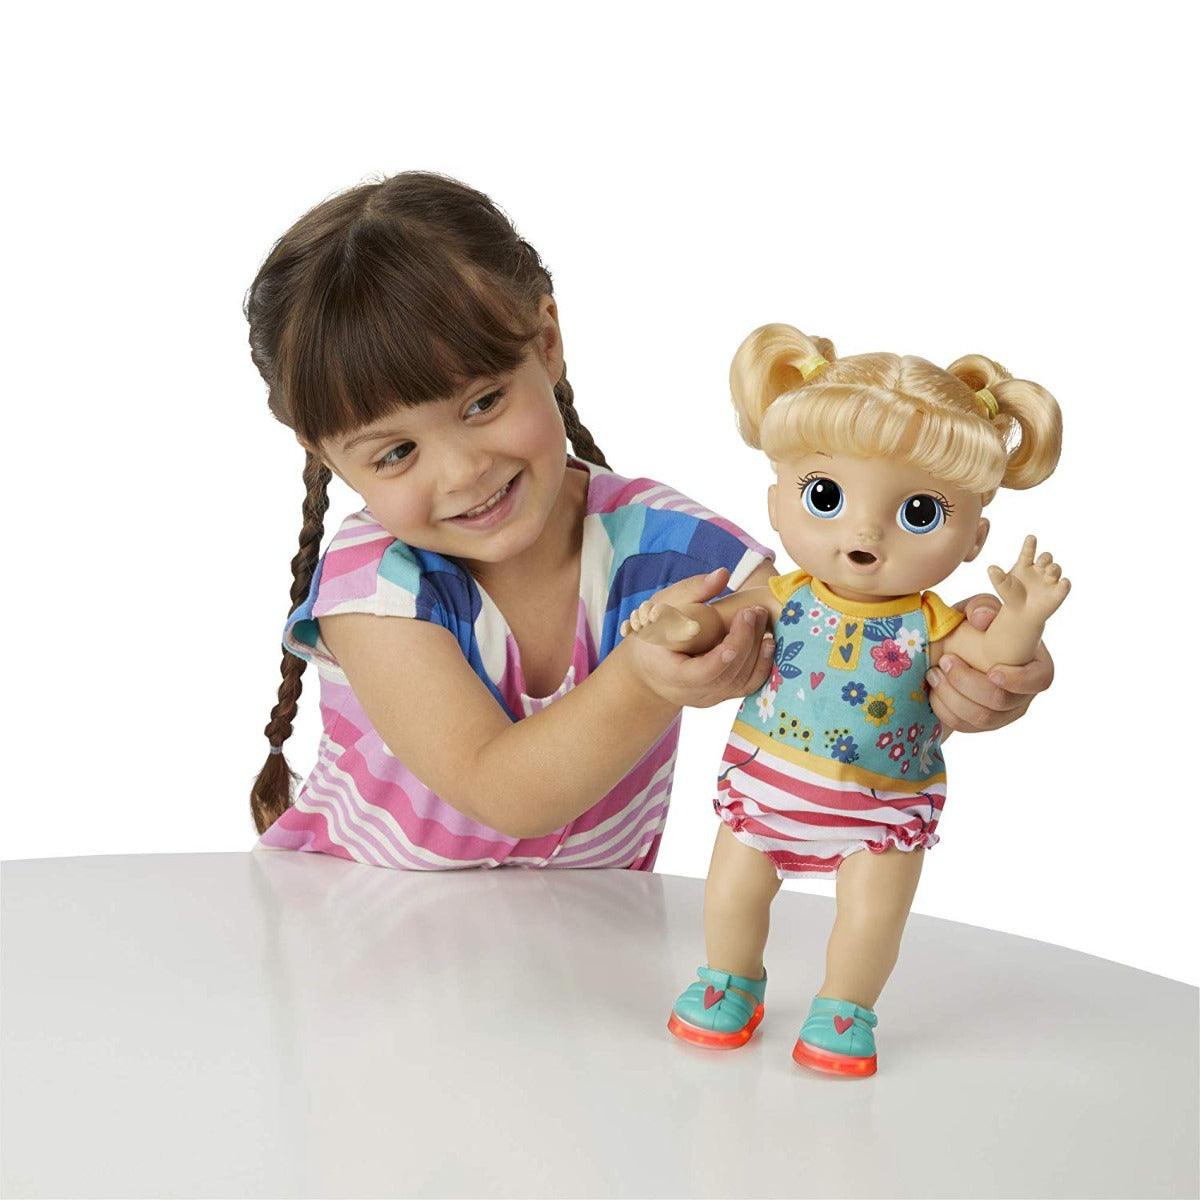 Baby Alive Step ‚Äö√Ñ√≤n Giggle Baby Blonde Hair Doll with Light-up Shoes, Responds with 25+ Sounds and Phrases, Drinks and Wets